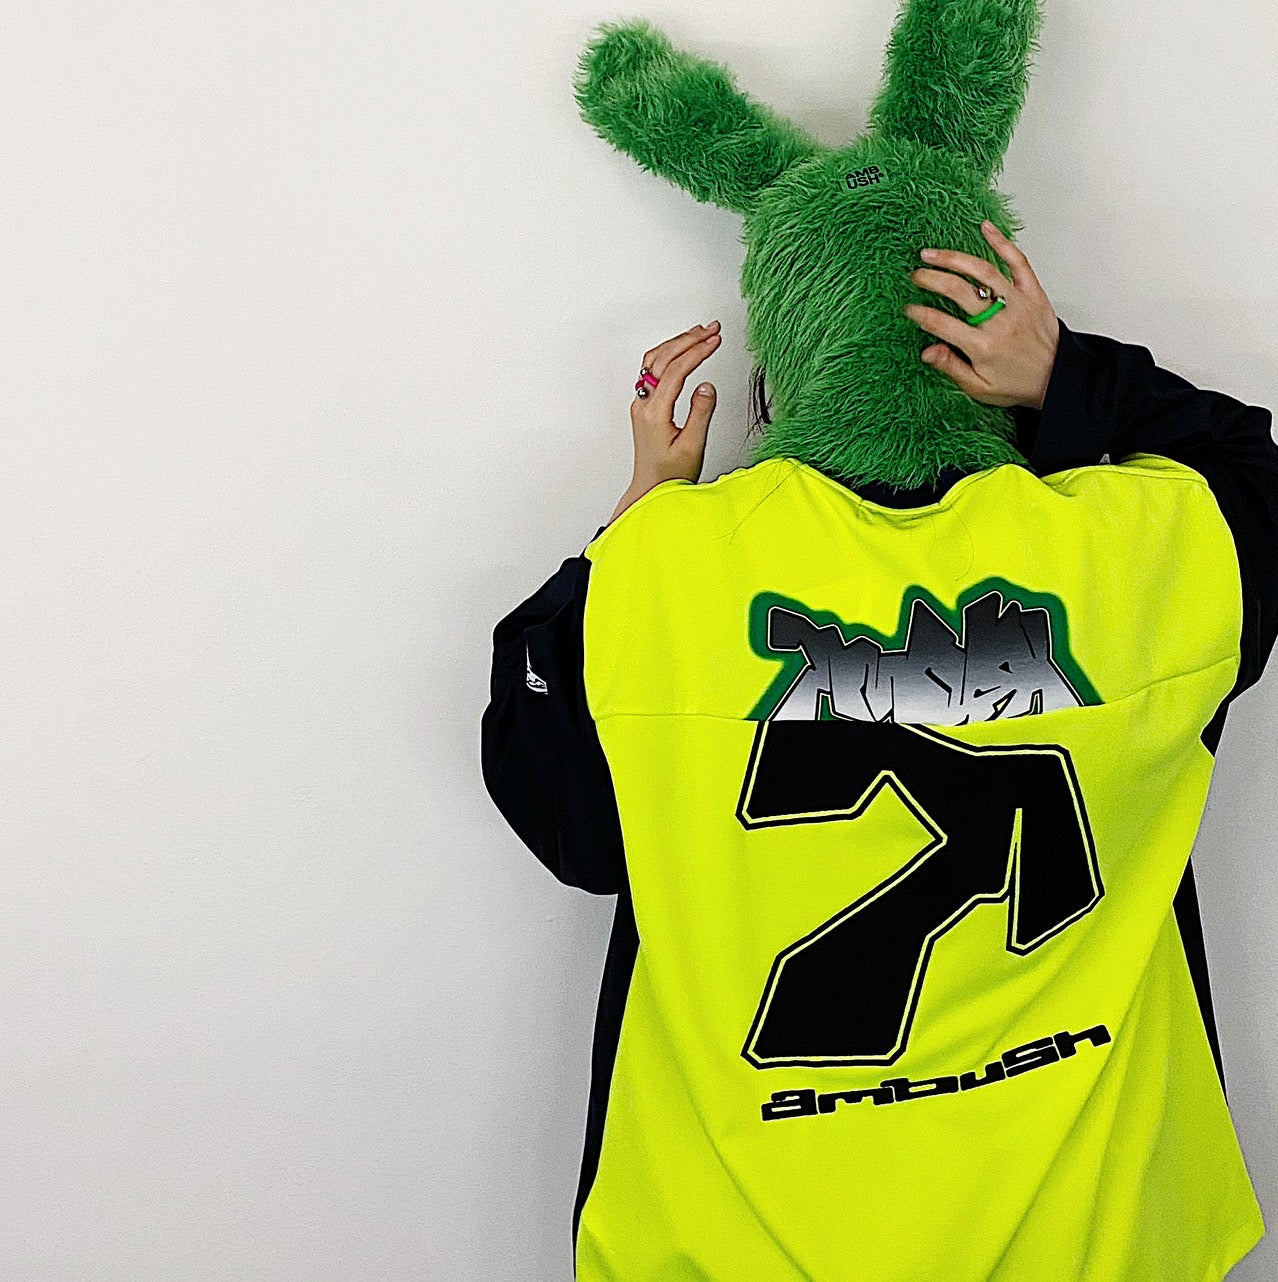 【AMBUSH®】<br> New items from the 23SS collection & "RAVE CHOOSE UR PLAYER" are now available!